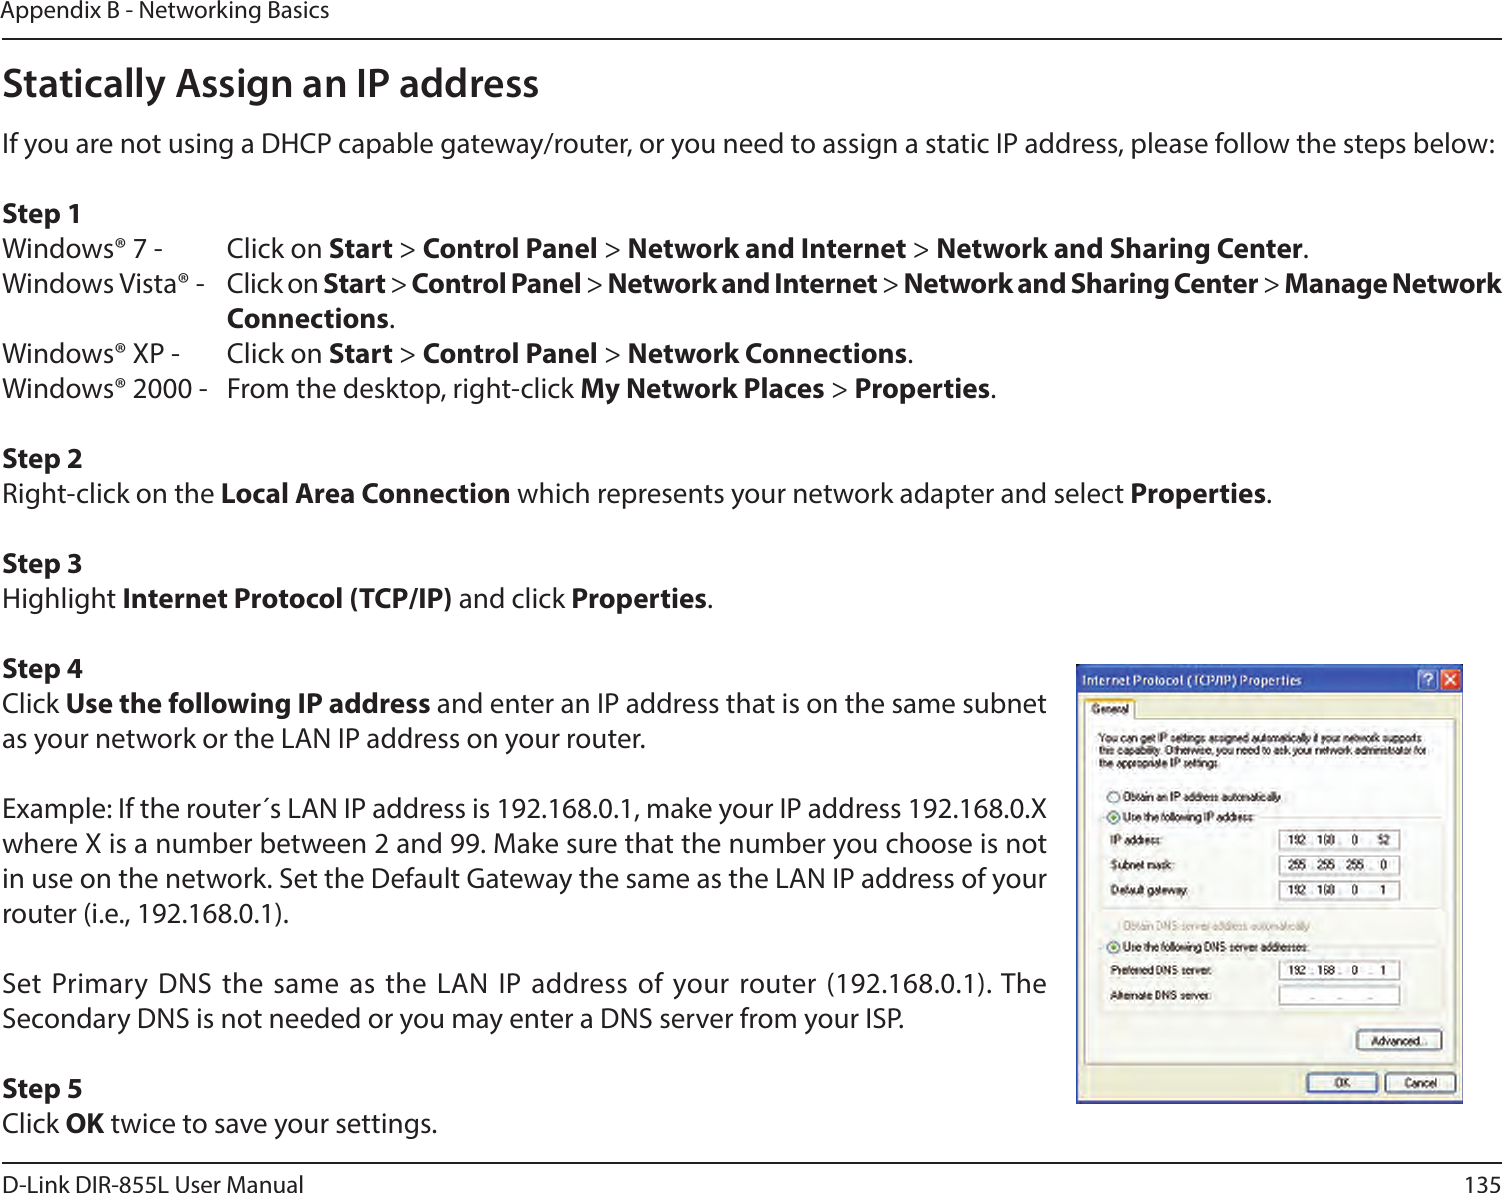 135D-Link DIR-855L User ManualAppendix B - Networking BasicsStatically Assign an IP addressIf you are not using a DHCP capable gateway/router, or you need to assign a static IP address, please follow the steps below:Step 1Windows® 7 -  Click on Start &gt; Control Panel &gt; Network and Internet &gt; Network and Sharing Center.Windows Vista® -  Click on Start &gt; Control Panel &gt; Network and Internet &gt; Network and Sharing Center &gt; Manage Network    Connections.Windows® XP -  Click on Start &gt; Control Panel &gt; Network Connections.Windows® 2000 -  From the desktop, right-click My Network Places &gt; Properties.Step 2Right-click on the Local Area Connection which represents your network adapter and select Properties.Step 3Highlight Internet Protocol (TCP/IP) and click Properties.Step 4Click Use the following IP address and enter an IP address that is on the same subnet as your network or the LAN IP address on your router. Example: If the router´s LAN IP address is 192.168.0.1, make your IP address 192.168.0.X where X is a number between 2 and 99. Make sure that the number you choose is not in use on the network. Set the Default Gateway the same as the LAN IP address of your router (i.e., 192.168.0.1). Set Primary DNS the same as the LAN IP address of your router (192.168.0.1). The Secondary DNS is not needed or you may enter a DNS server from your ISP.Step 5Click OK twice to save your settings.